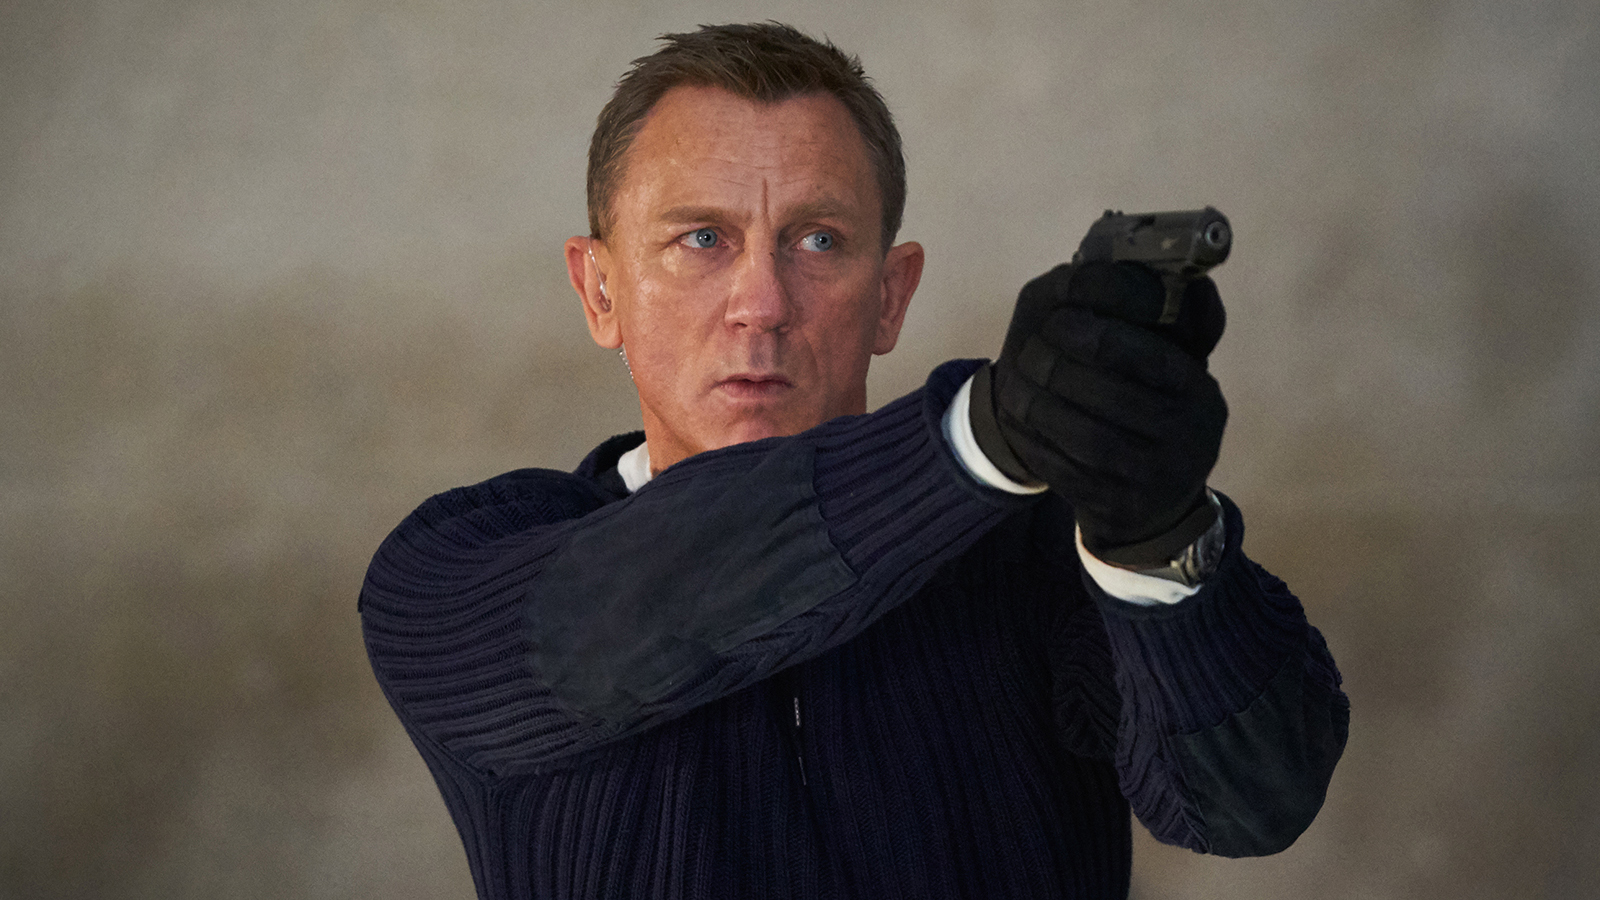 Fans Outraged That Amazon Is ‘Cheapening James Bond’s Legacy’ With New Reality Show